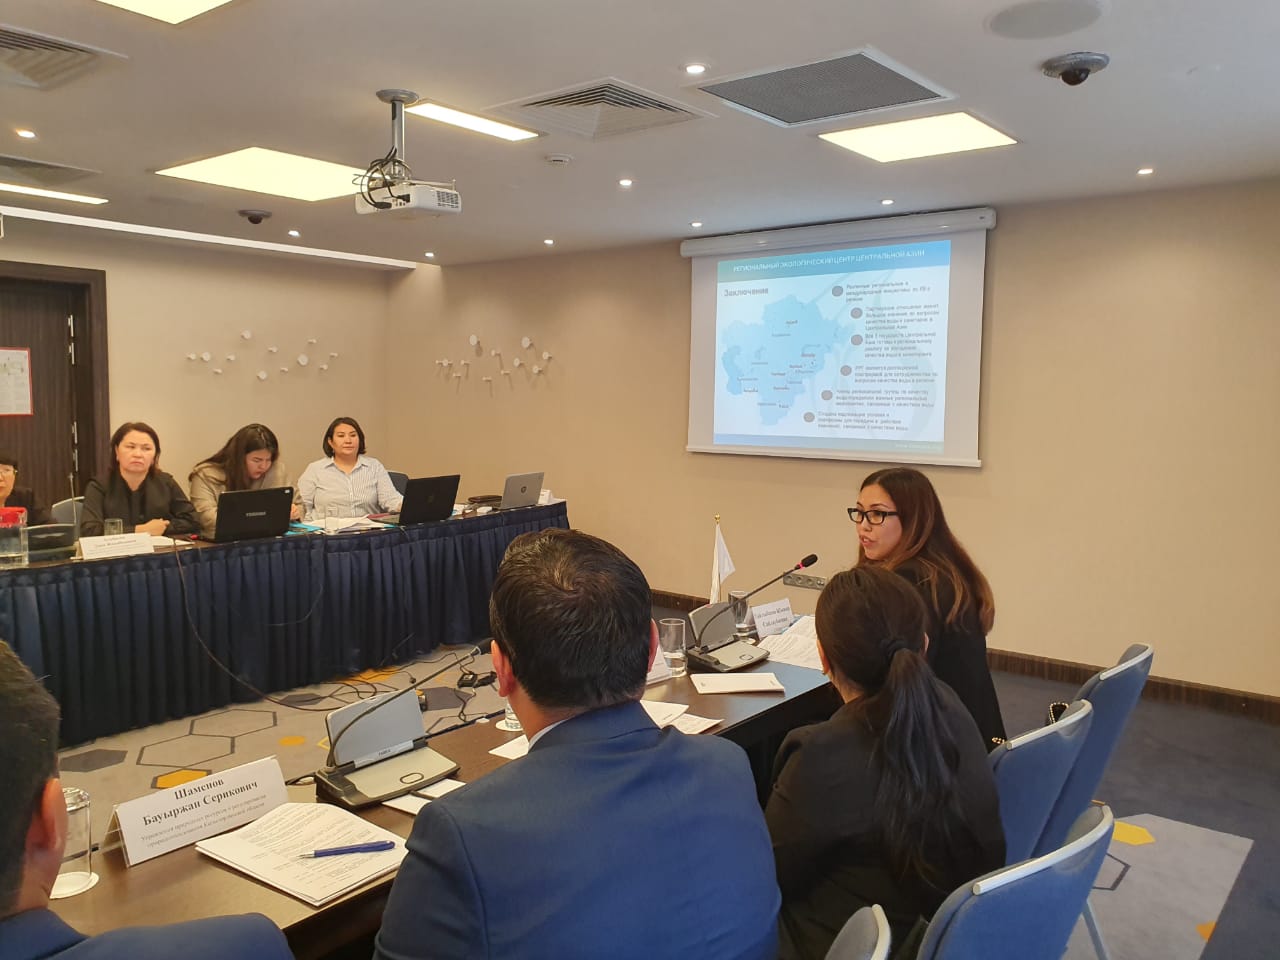 The 2nd meeting of the Kazakh-Uzbek joint working group on environmental protection and water quality of the Syrdarya river basin